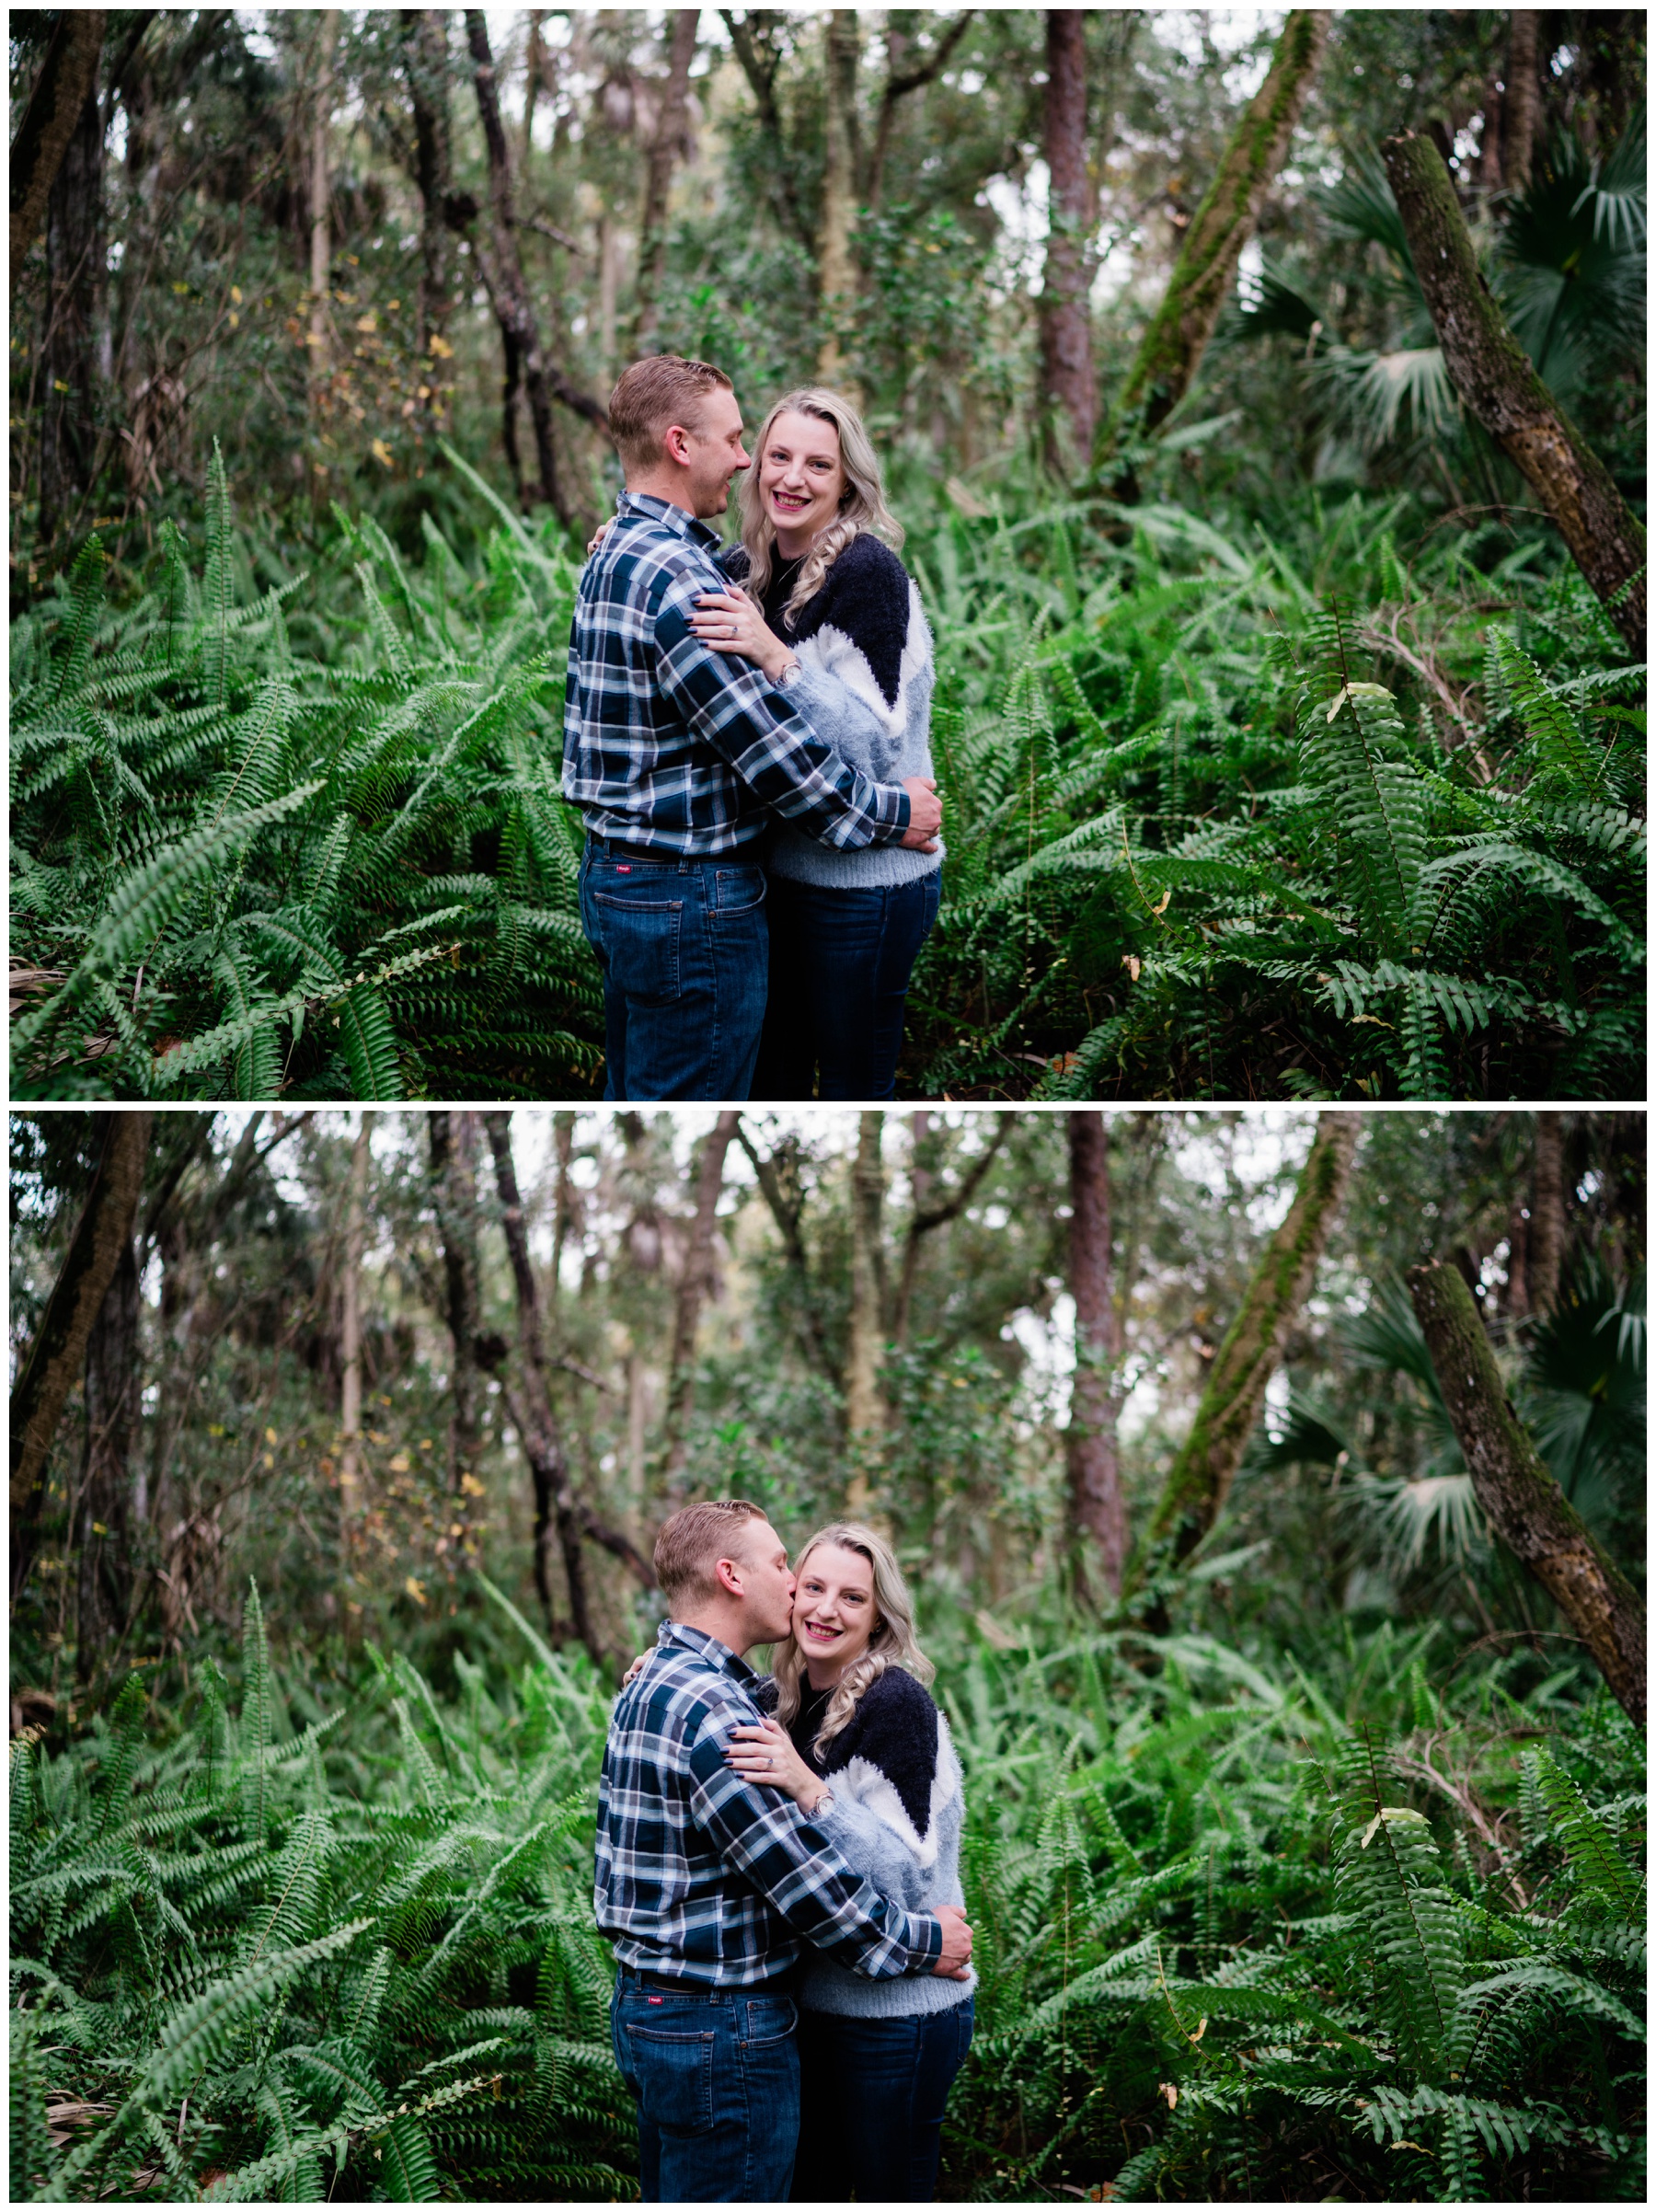 Couple embraces in swamp setting during Fort Myers photo shoot.